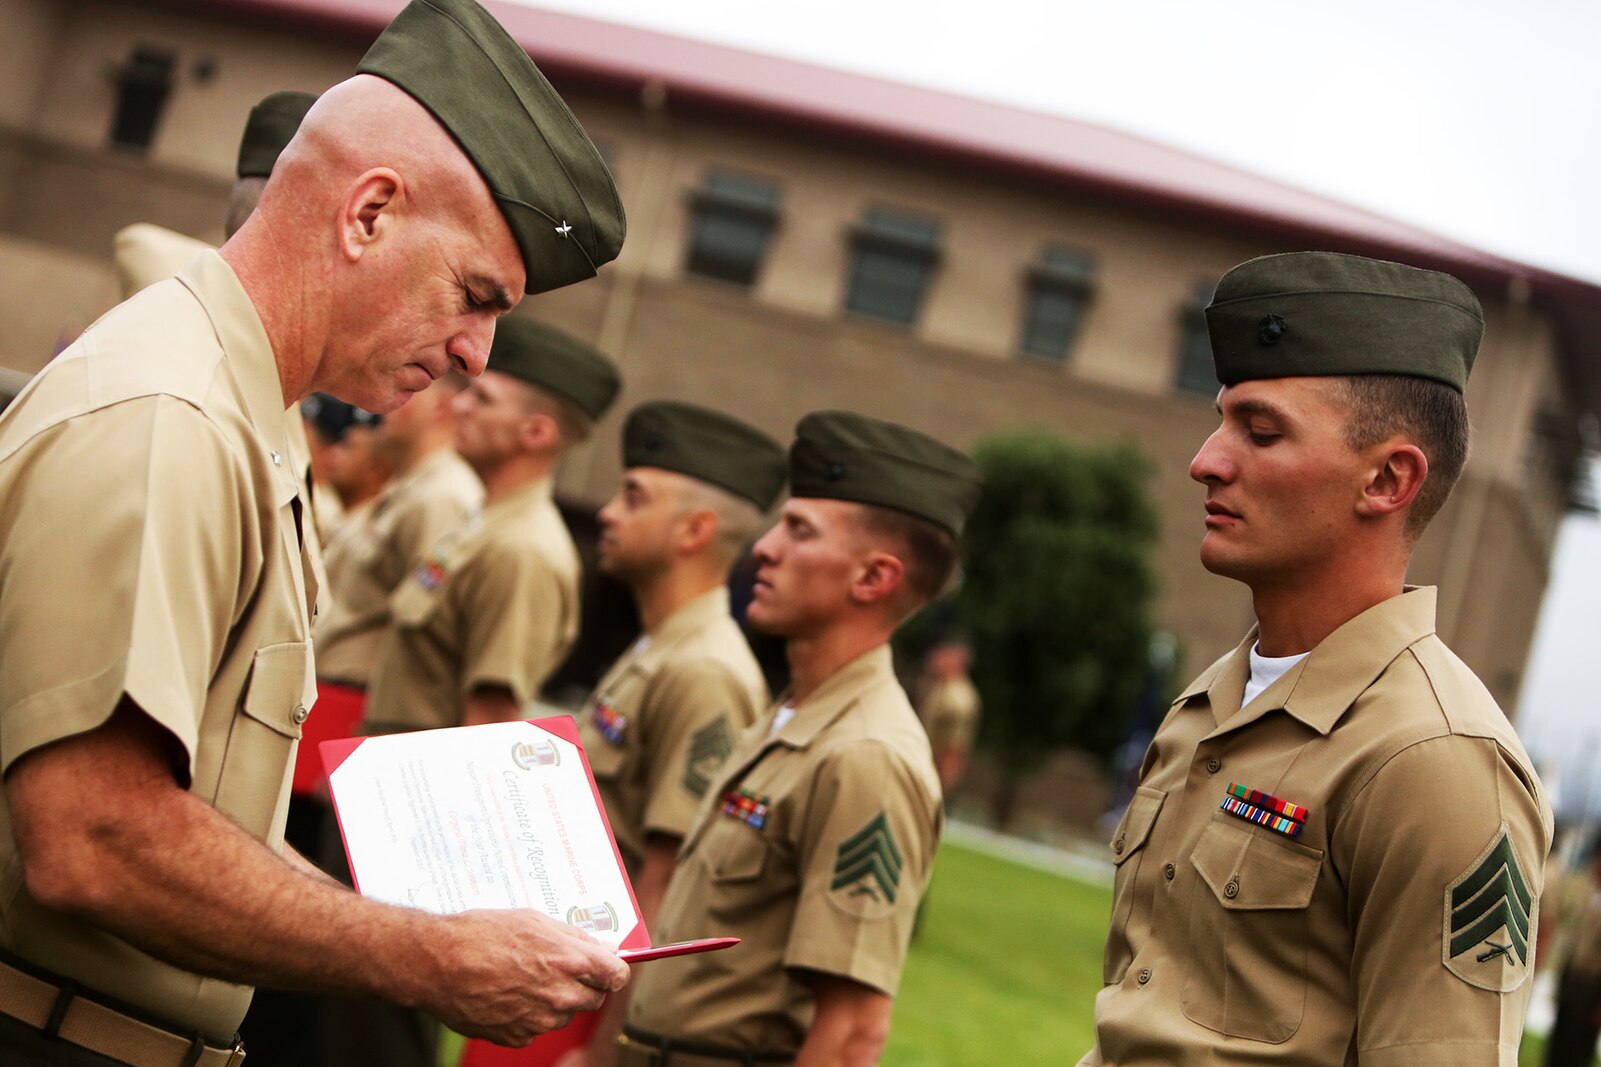 U.S. Marine Sgt. Johnathan Howley is awarded a Navy and Marine Corps Achievement Medal during an awards ceremony aboard Camp Pendleton, Calif., April 22, 2016. Howley is a bulk fuel specialist with 7th Engineer Support Battalion. Ten Marines and Sailors with 1st Marine Logistics Group were recognized for their outstanding performance throughout the year. Awards ranged from a Certificate of Commendation, Marine of the year, Noncommissioned Officer of the Year, and the Navy and Marine Corps Achievement Medal.  (U.S. Marine Corps photo by Sgt. Laura Gauna/released)